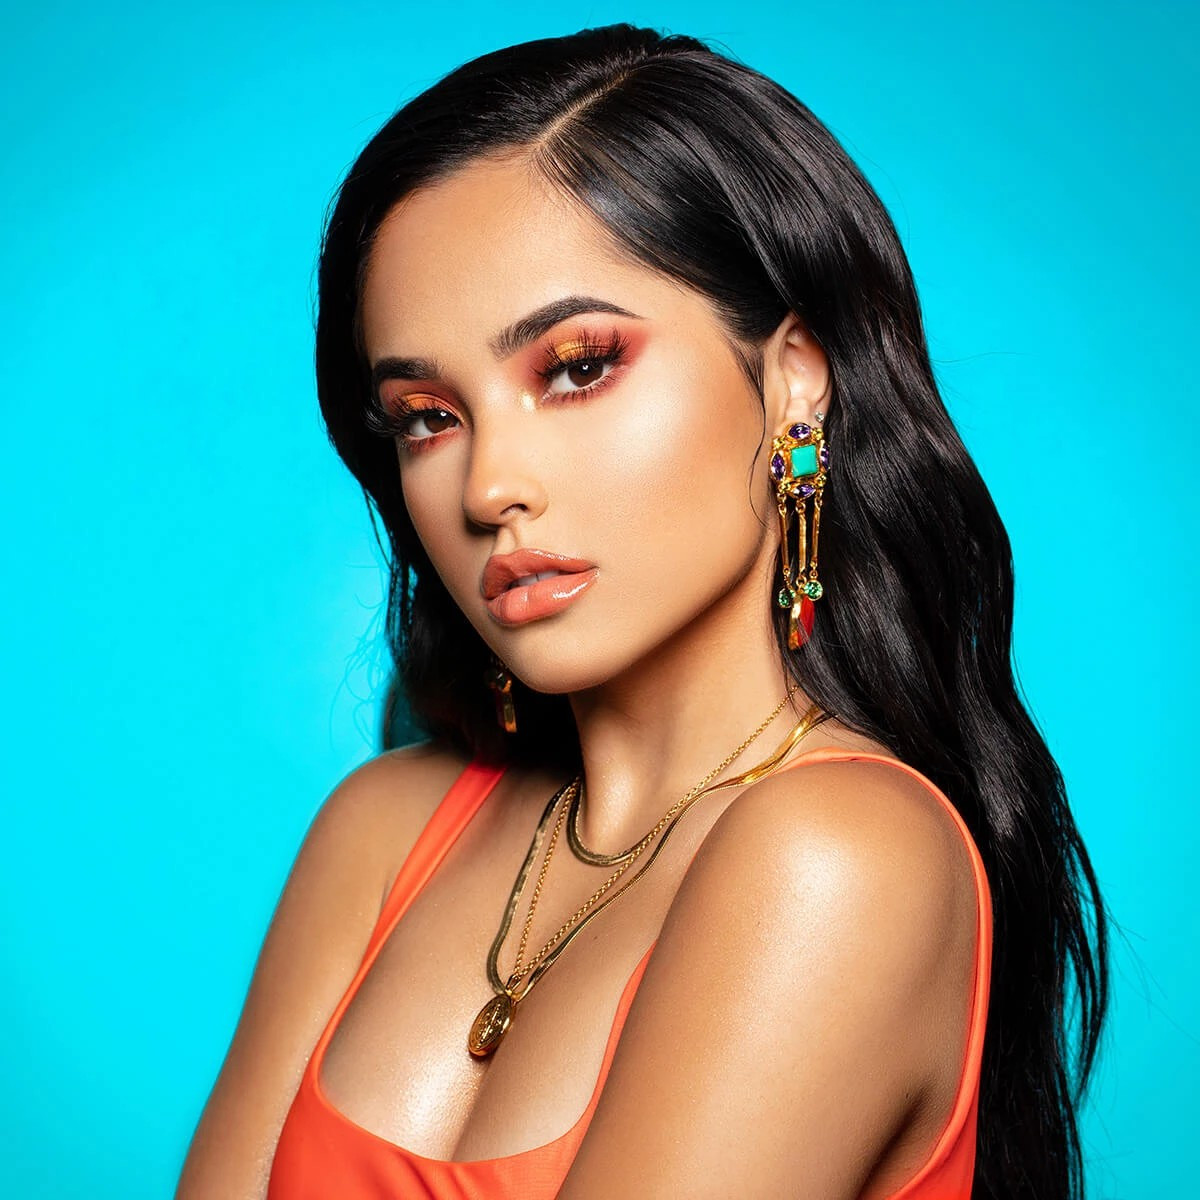 Becky G photo 216 of 342 pics, wallpaper photo 1162432 ThePlace2